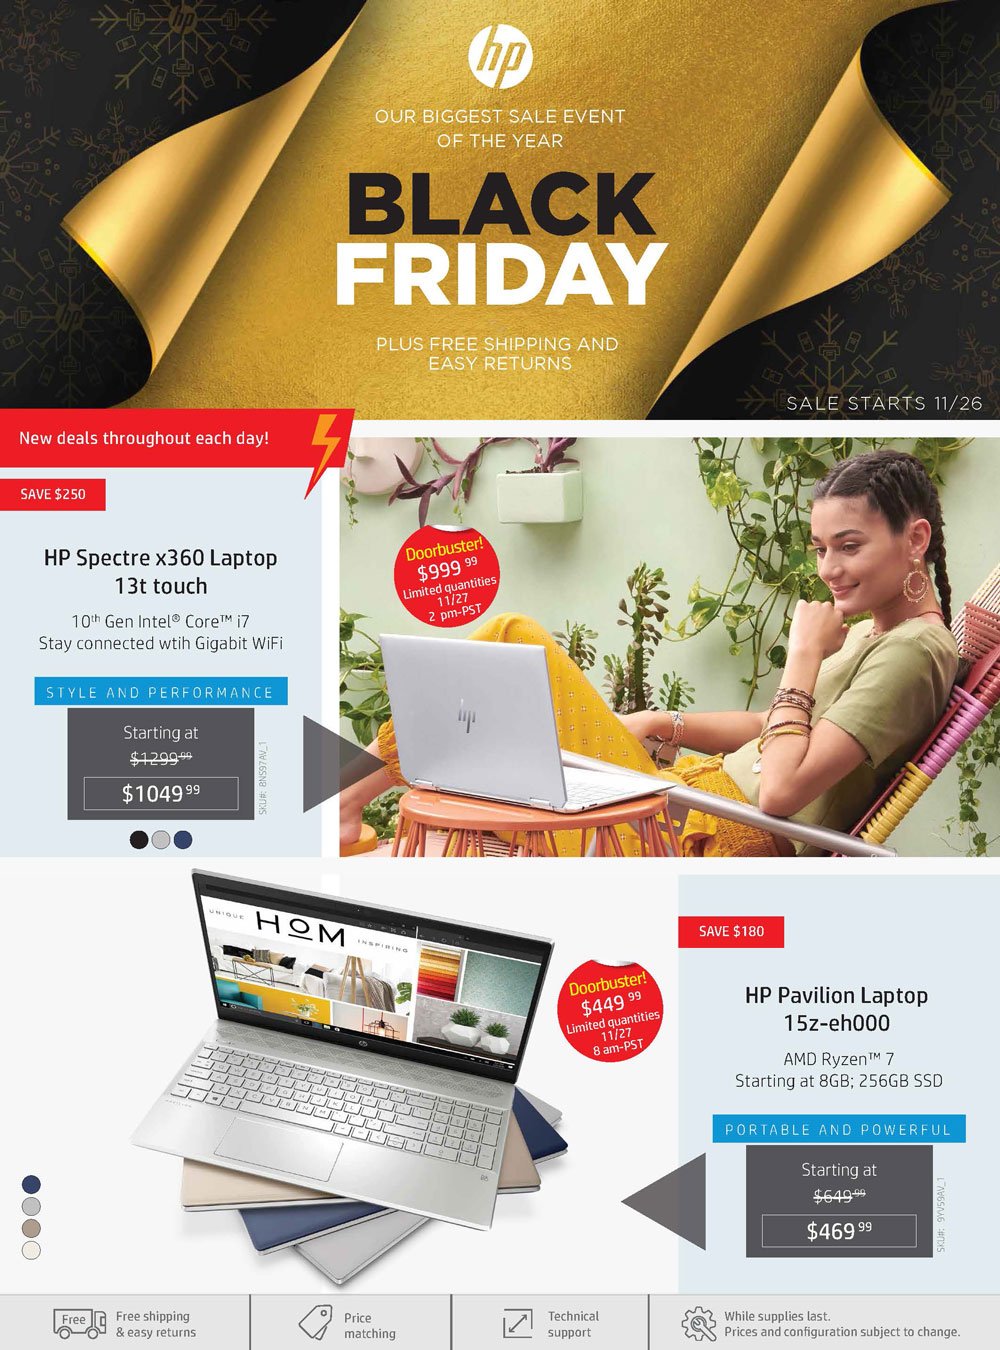 HP Black Friday 2021 Ad - Savings.com - What Is Anthropologie Black Friday 2021 Deals